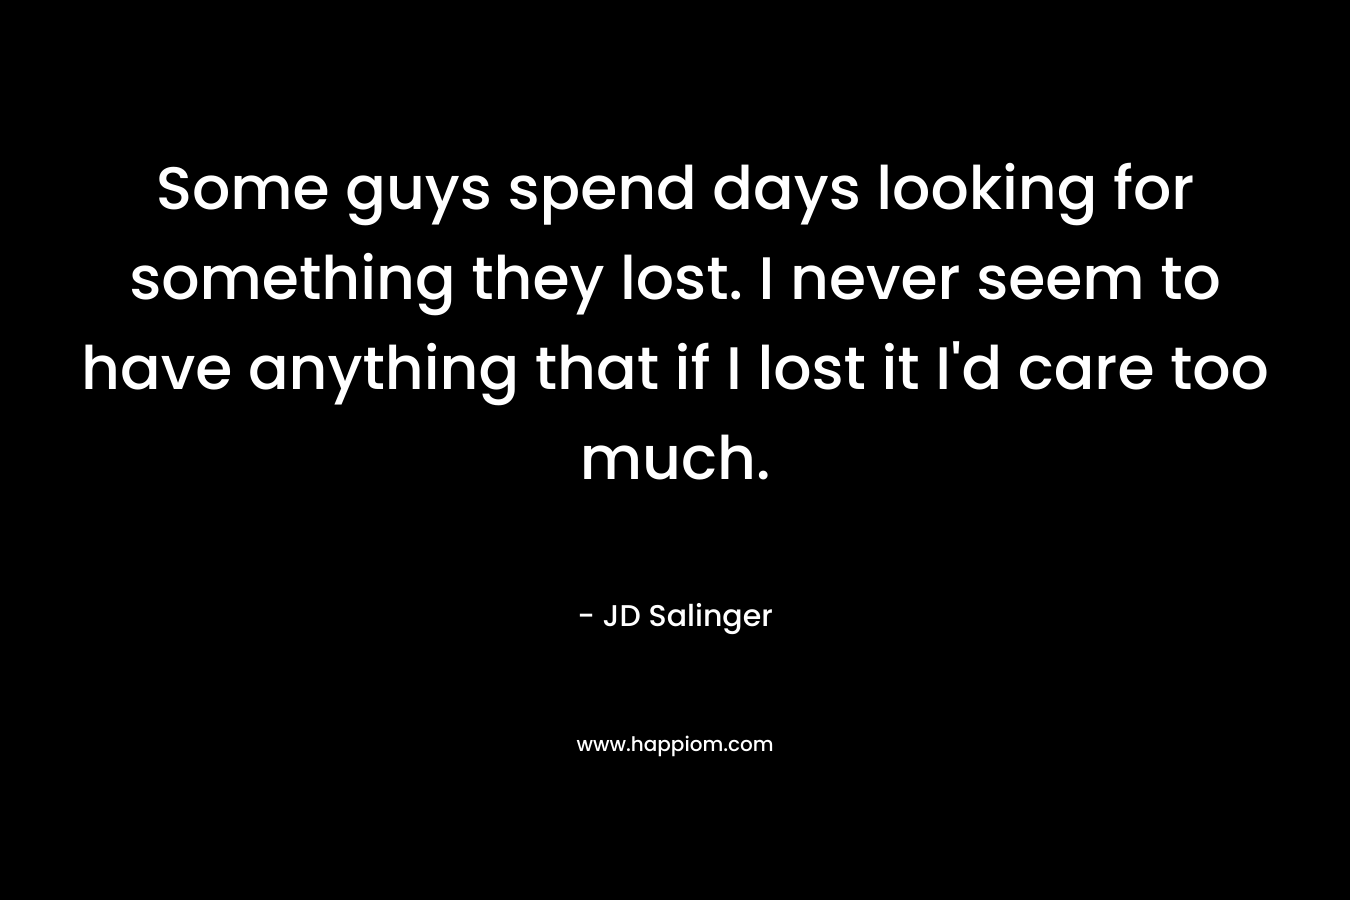 Some guys spend days looking for something they lost. I never seem to have anything that if I lost it I'd care too much.